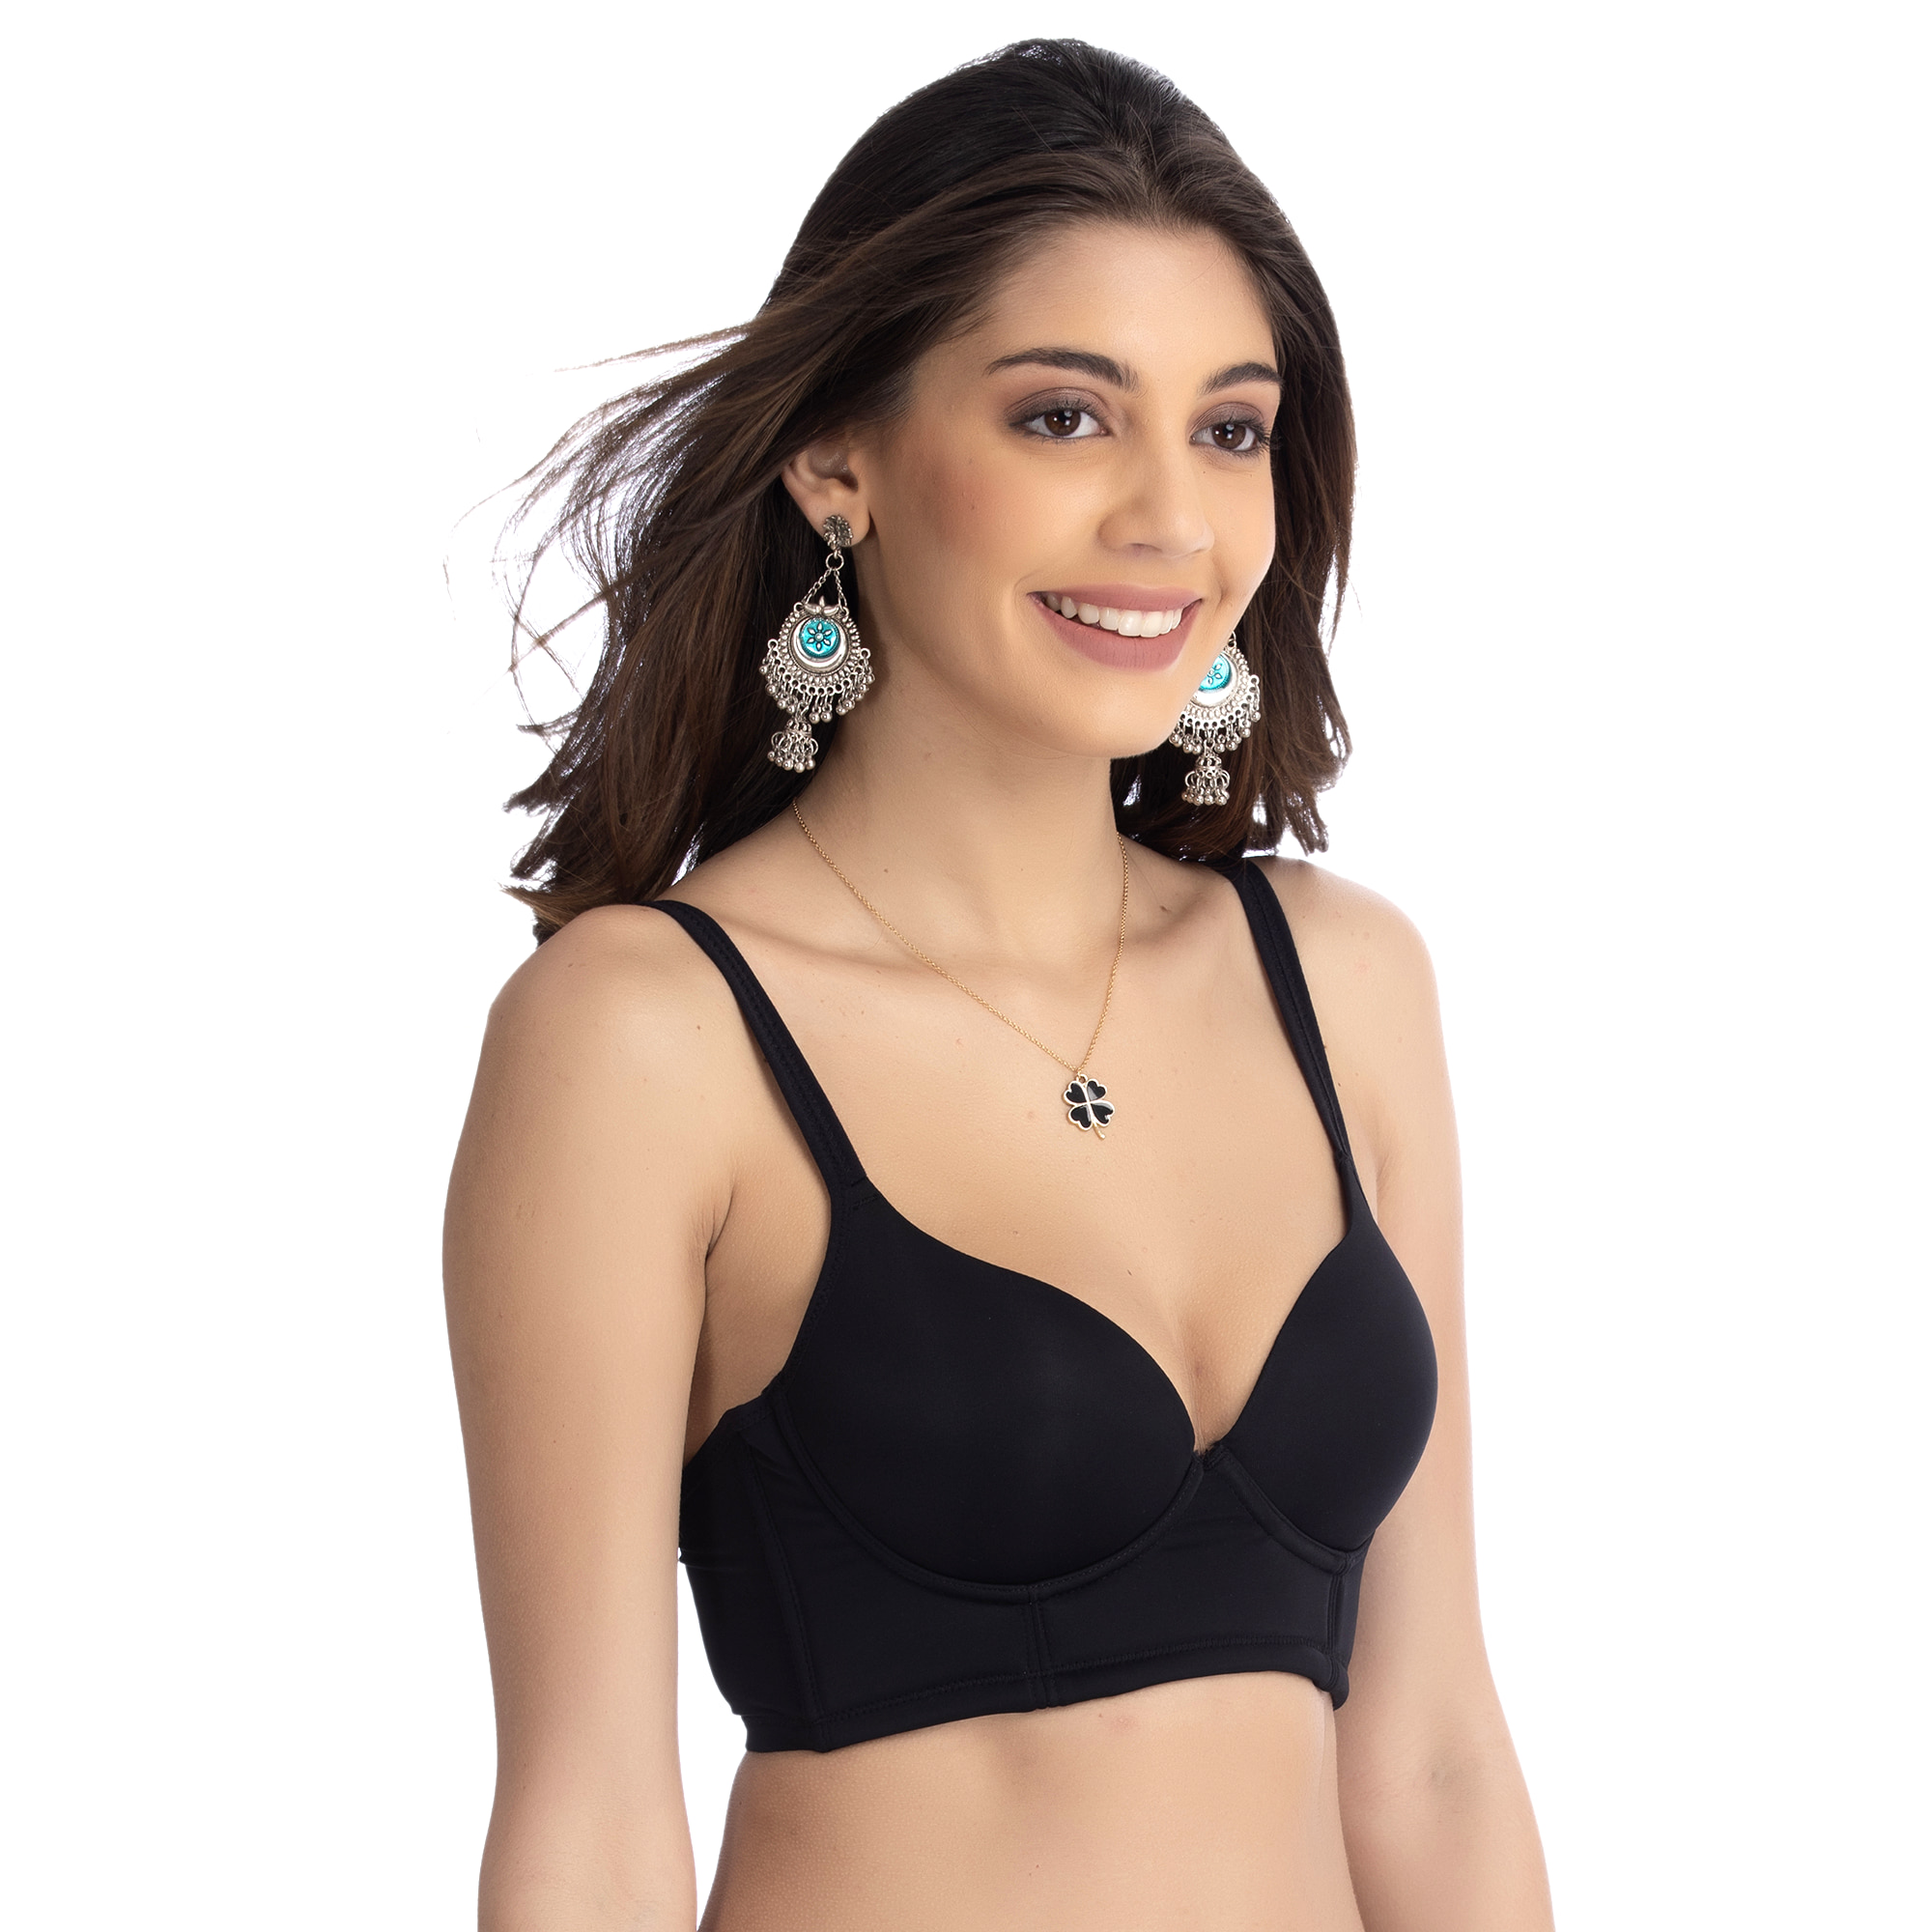 Cutee Flexi fit Plain Non-Wired Crop Top Bra